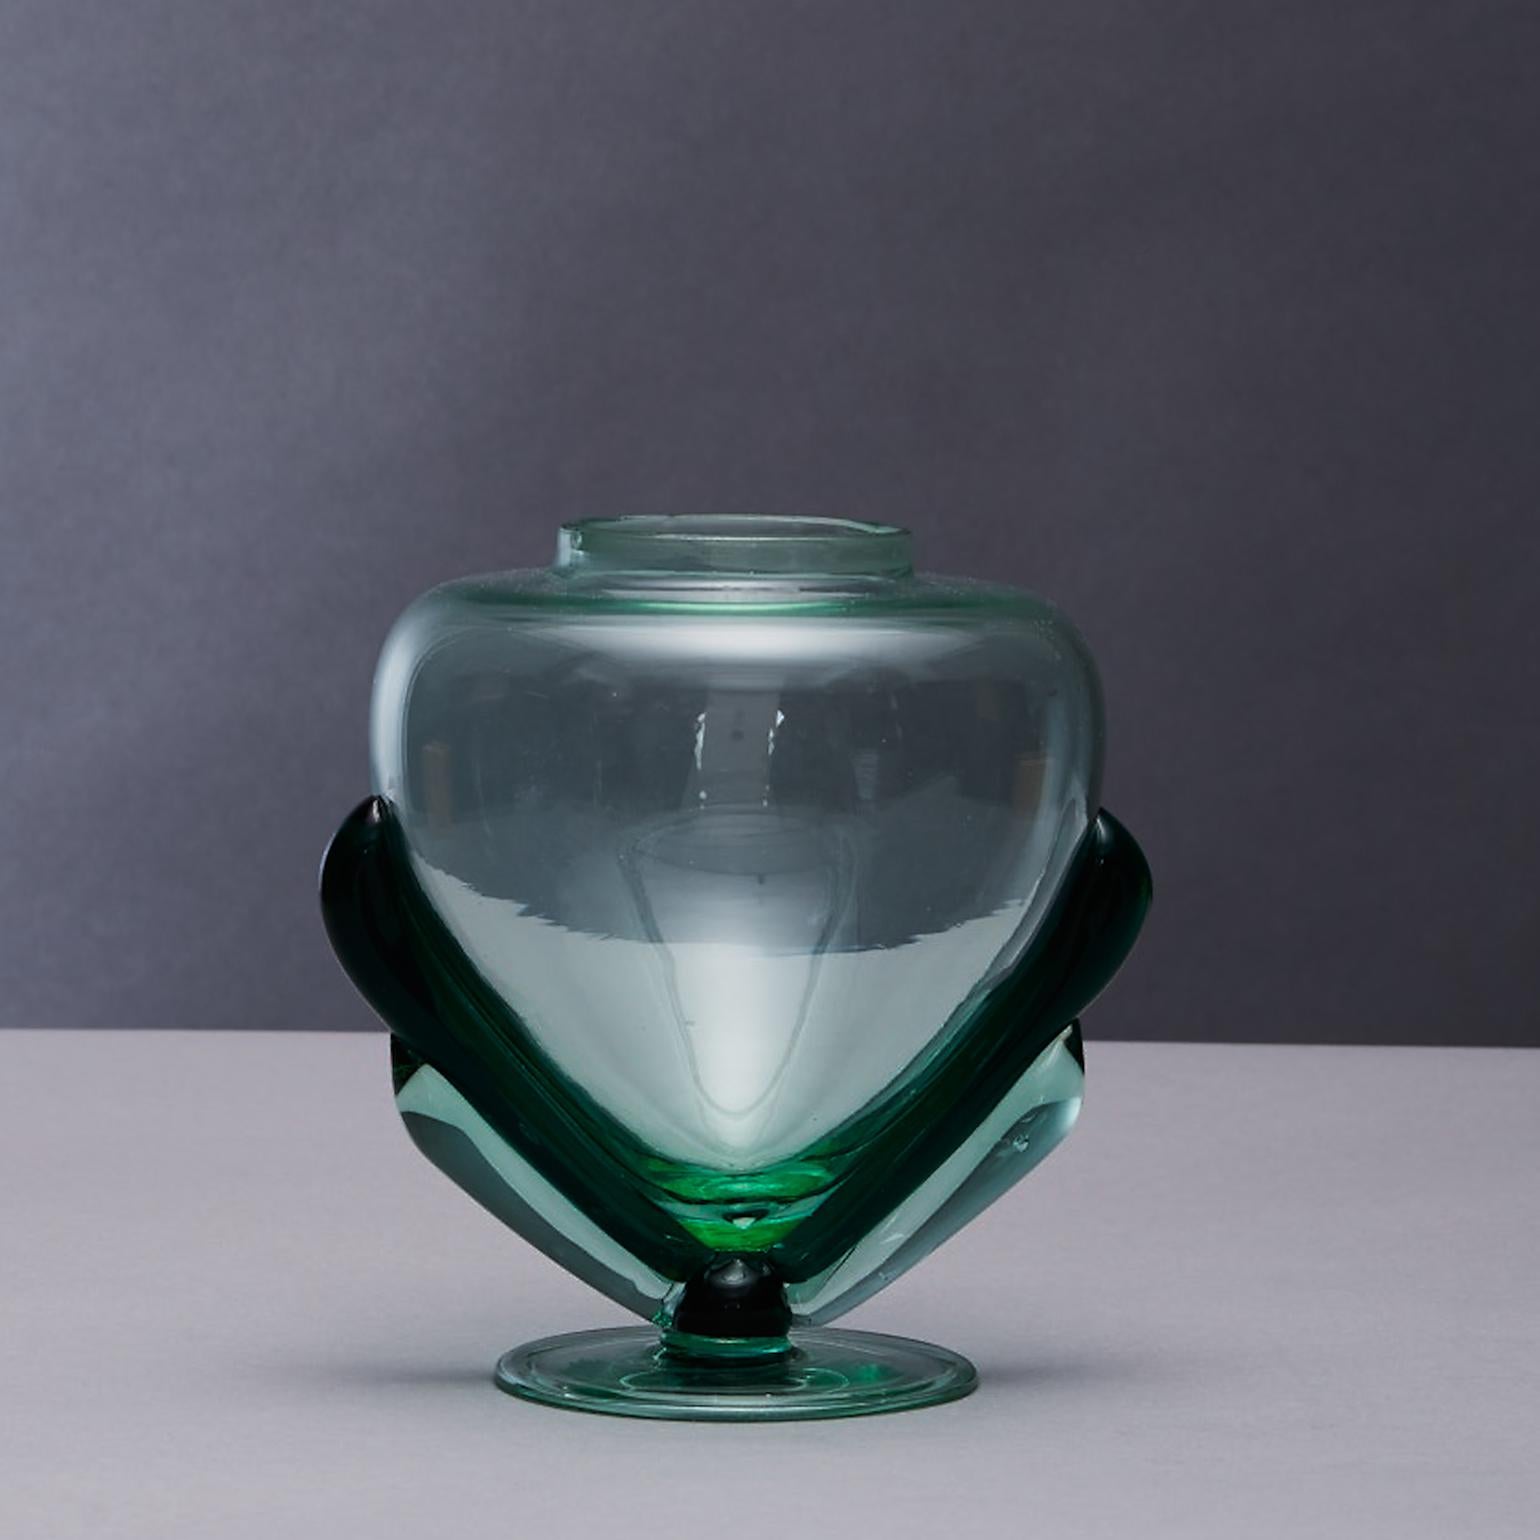 The perfume Bottle by Carlo Scarpa (1906-1978) circa 1928-29 for MVM Cappellin company was formed in 1925 by Paolo Venini and Giacomo Cappellin. The bottle was hand blown into a heart shaped transparent and translucent emerald green glass. There is